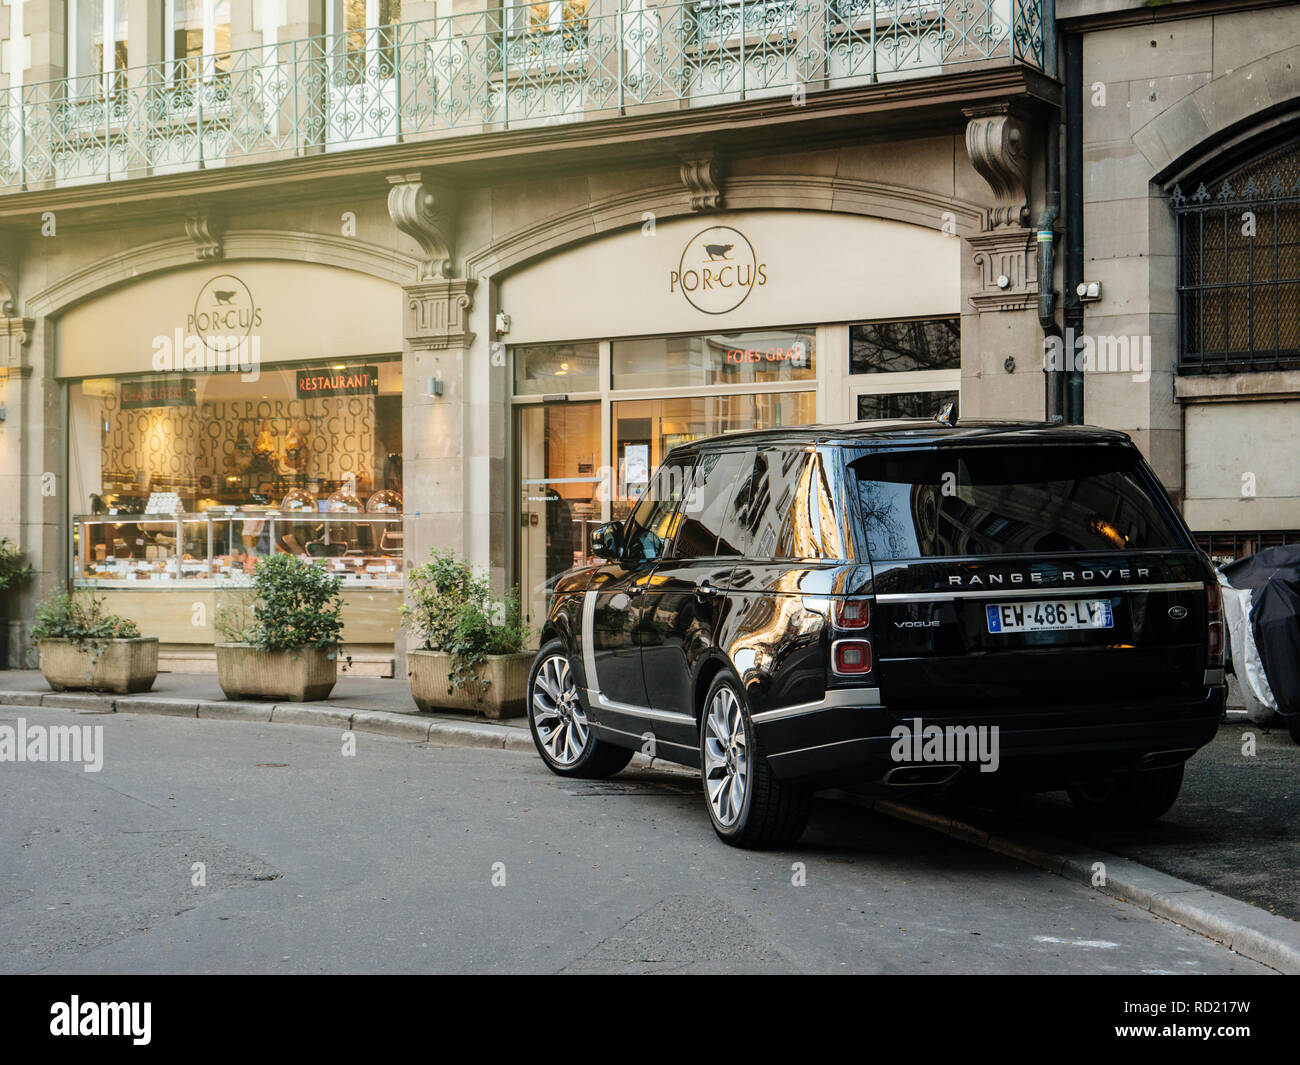 STRASBOURG, FRANCE - 13 MAR, 2018: New Range Rover Land Rover Vogue, the luxury British SUV parked in central French street near butcher shop Porcus Place du Temple Neuf  Stock Photo